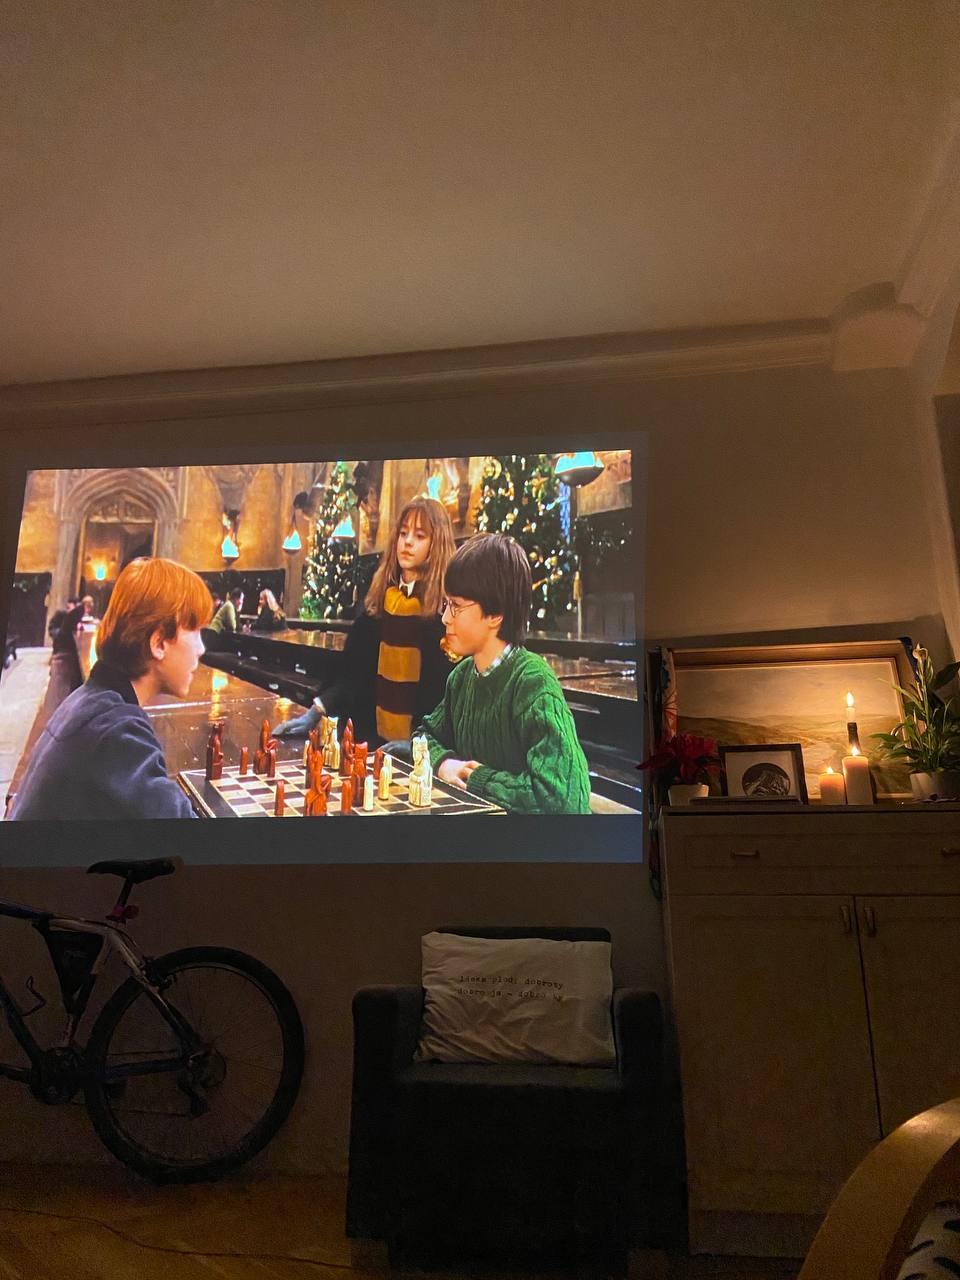 Room with led projector playing Harry Potter